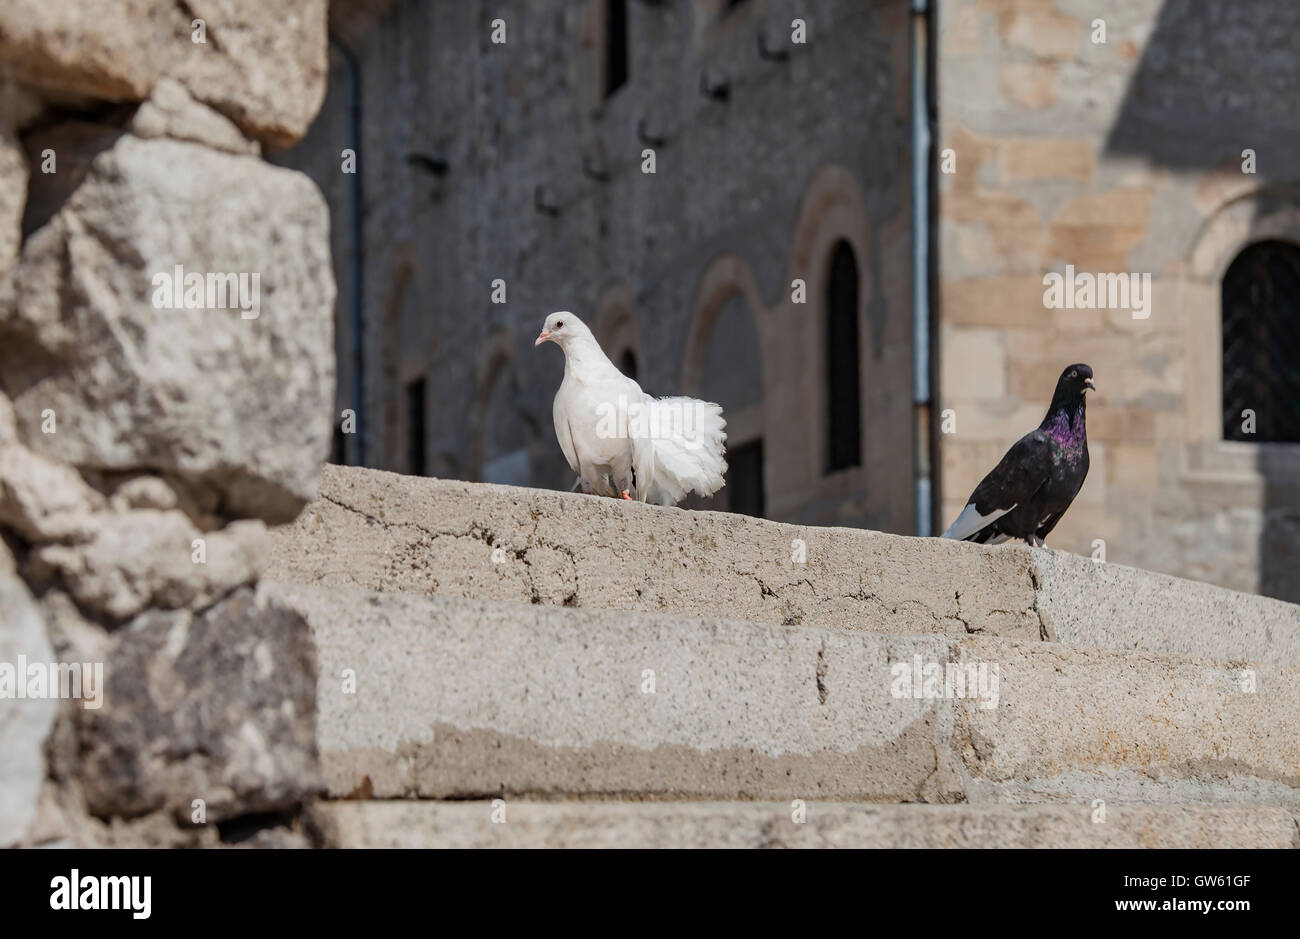 White and black pigeons on stairs in front of a massive building in the background. Stock Photo